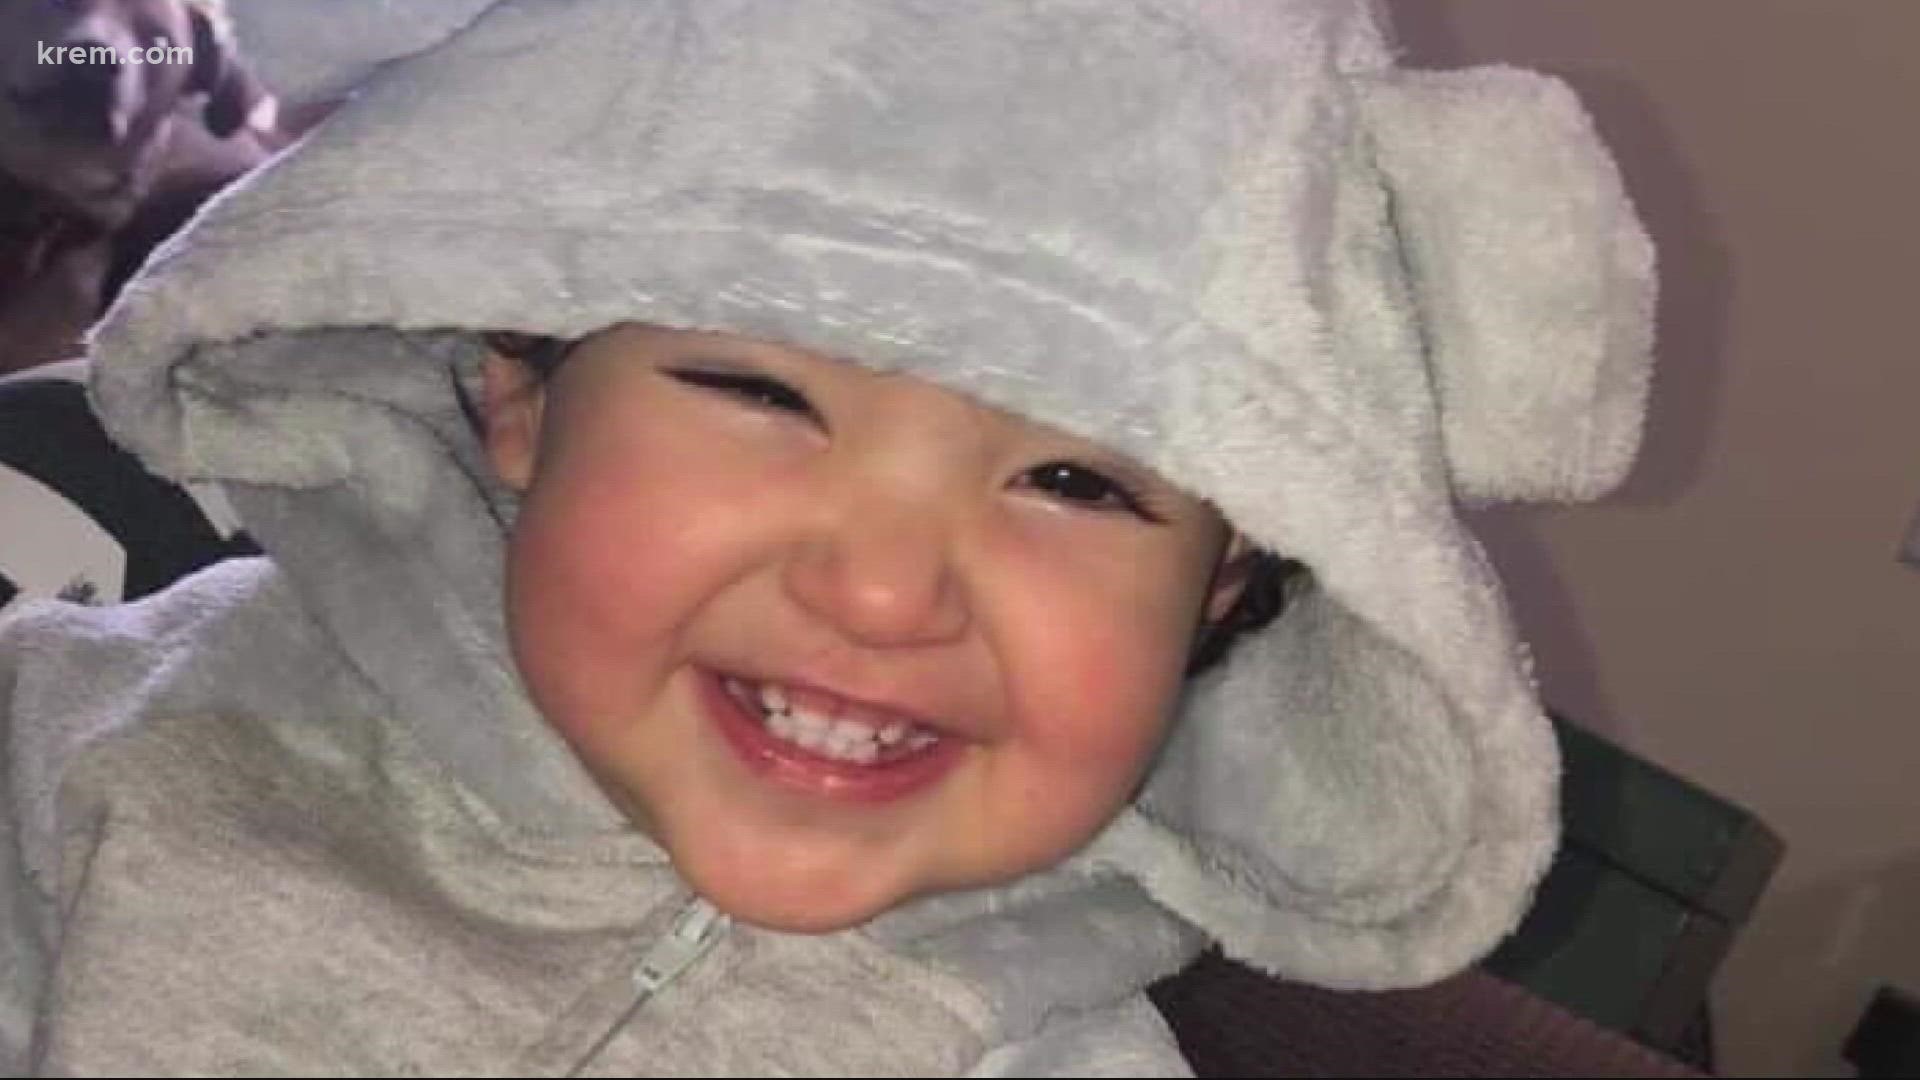 The Spokane County Medical Examiner's autopsy report listed both the cause and manner of Azaelia's death as 'undetermined.'